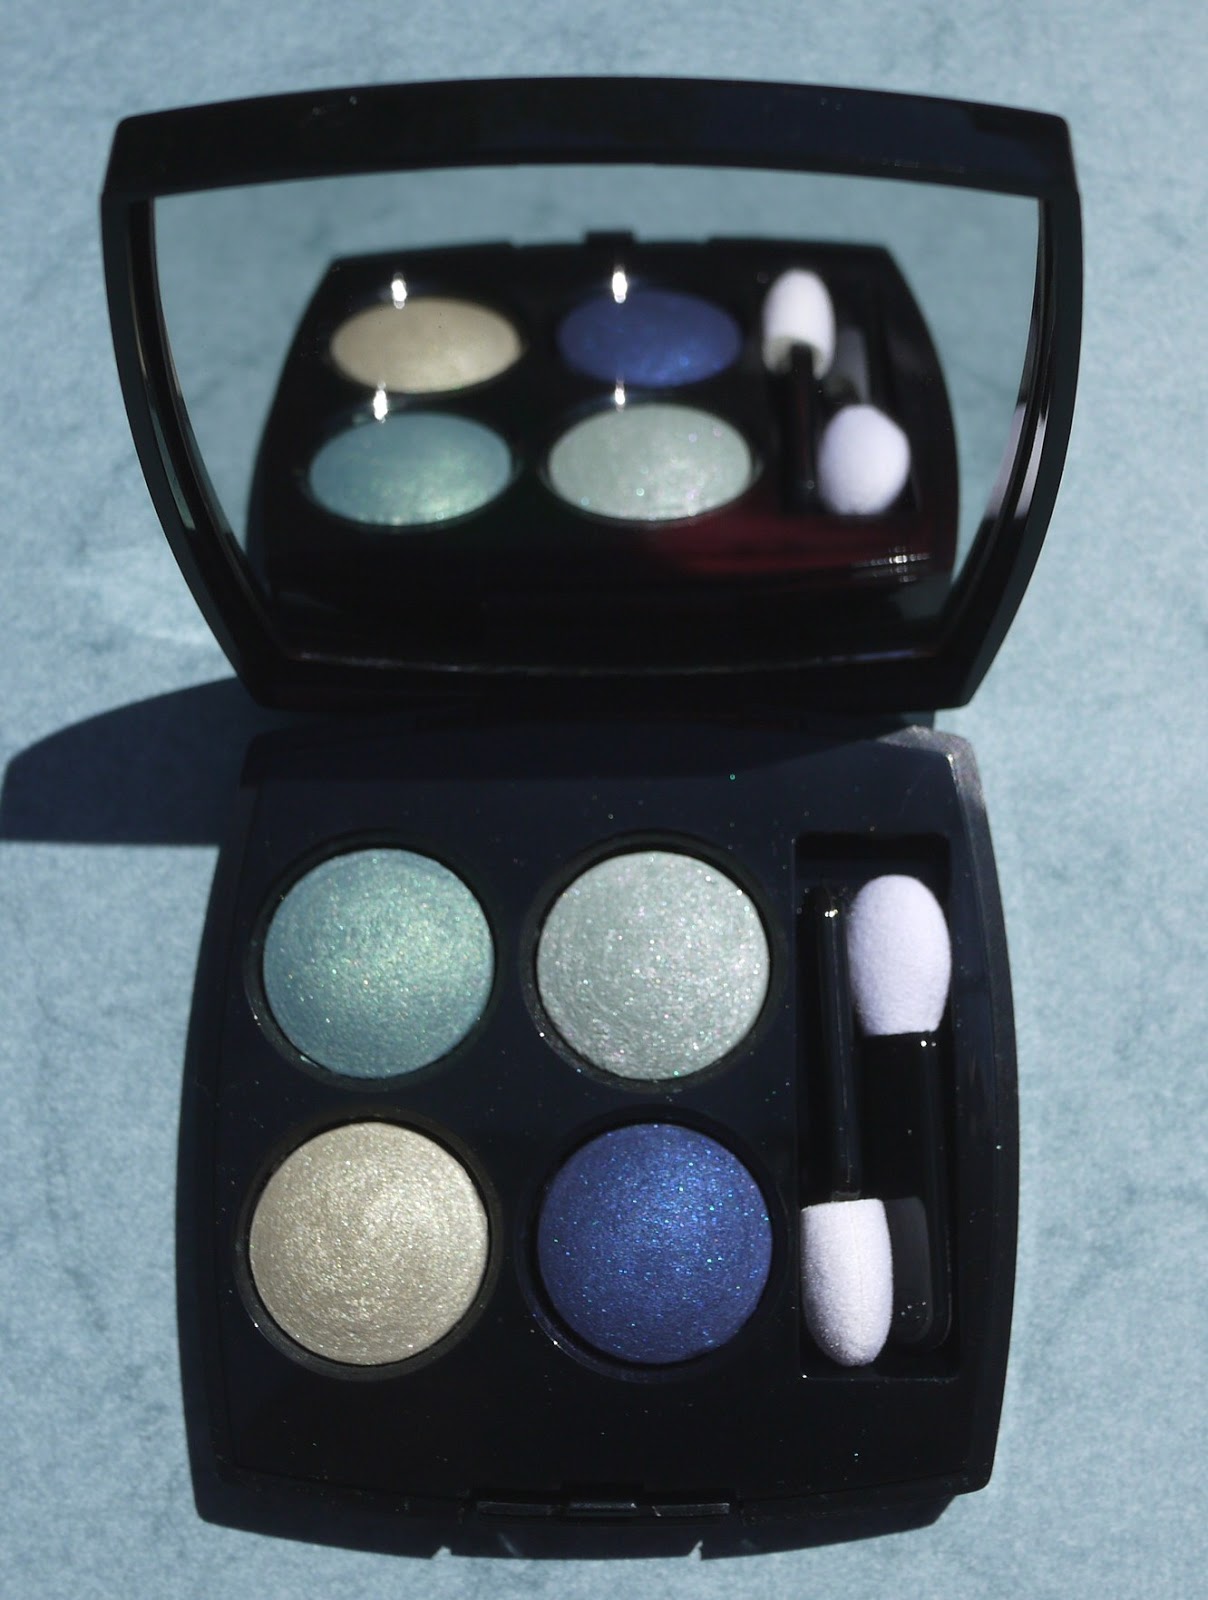 Chanel Spring 2011 Swatches: Les 4 Ombres in 20 Regard Perlé